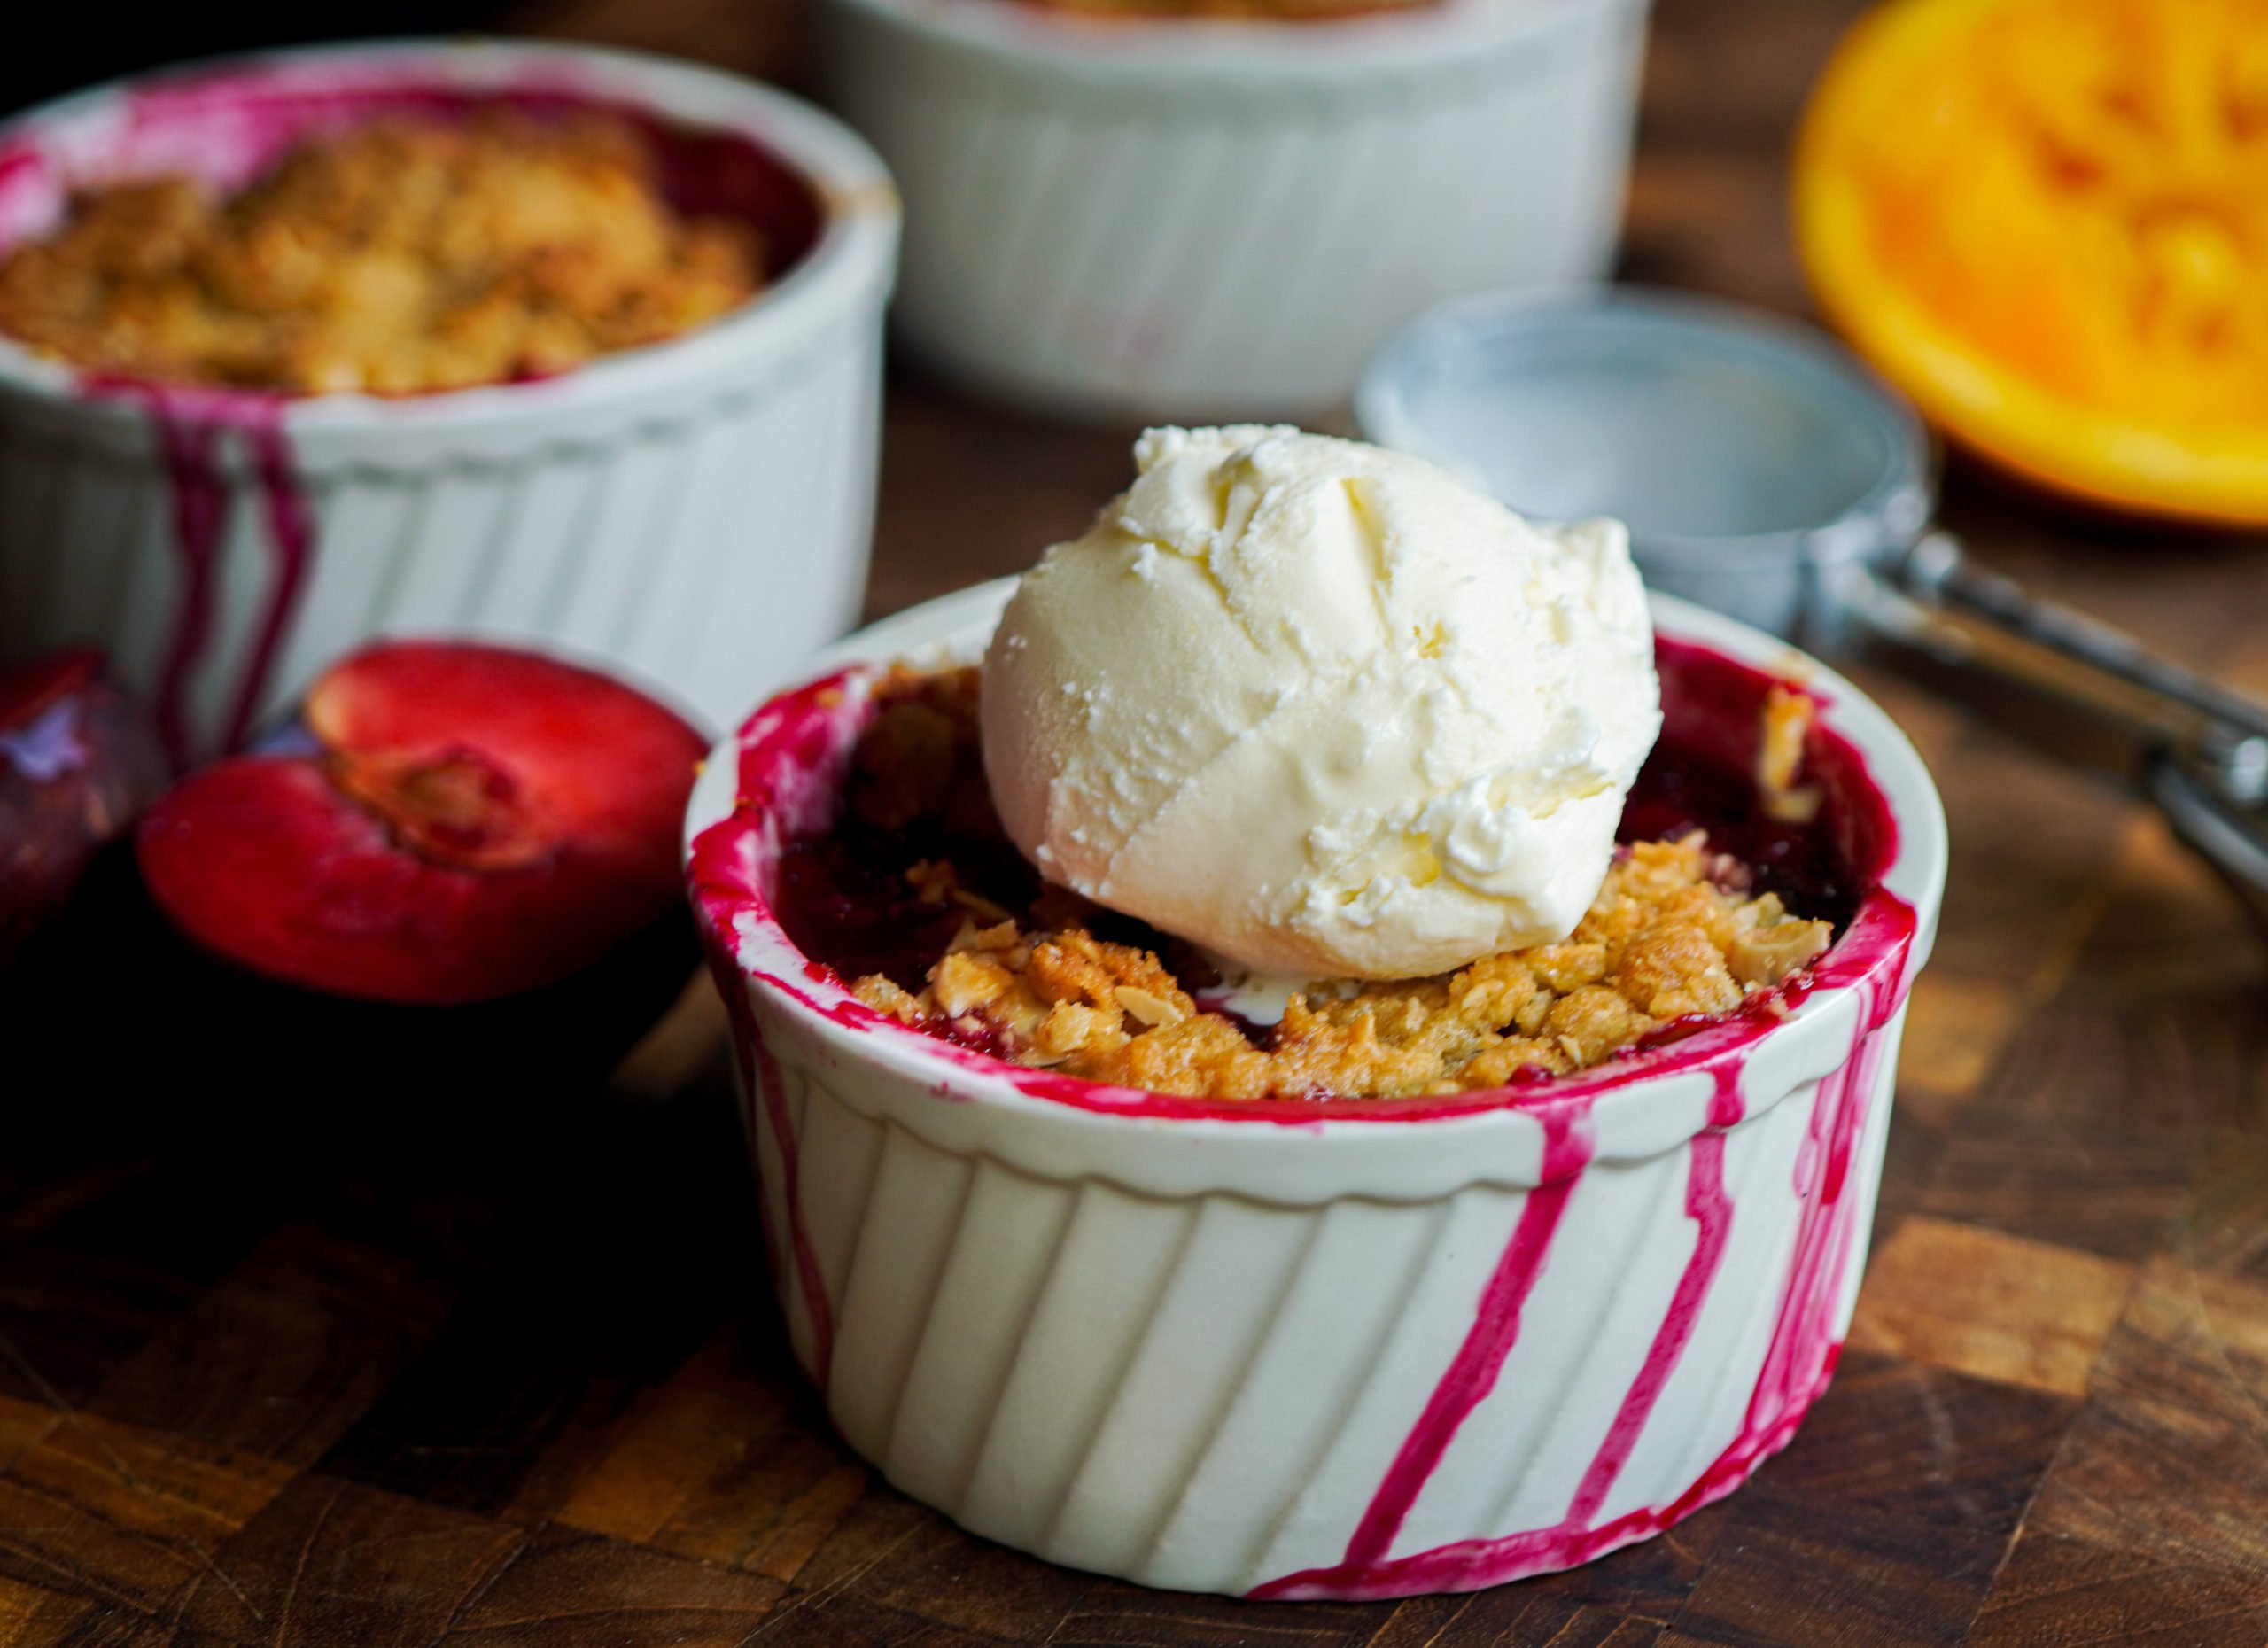 plumcot crumble served naked or with vanilla ice cream